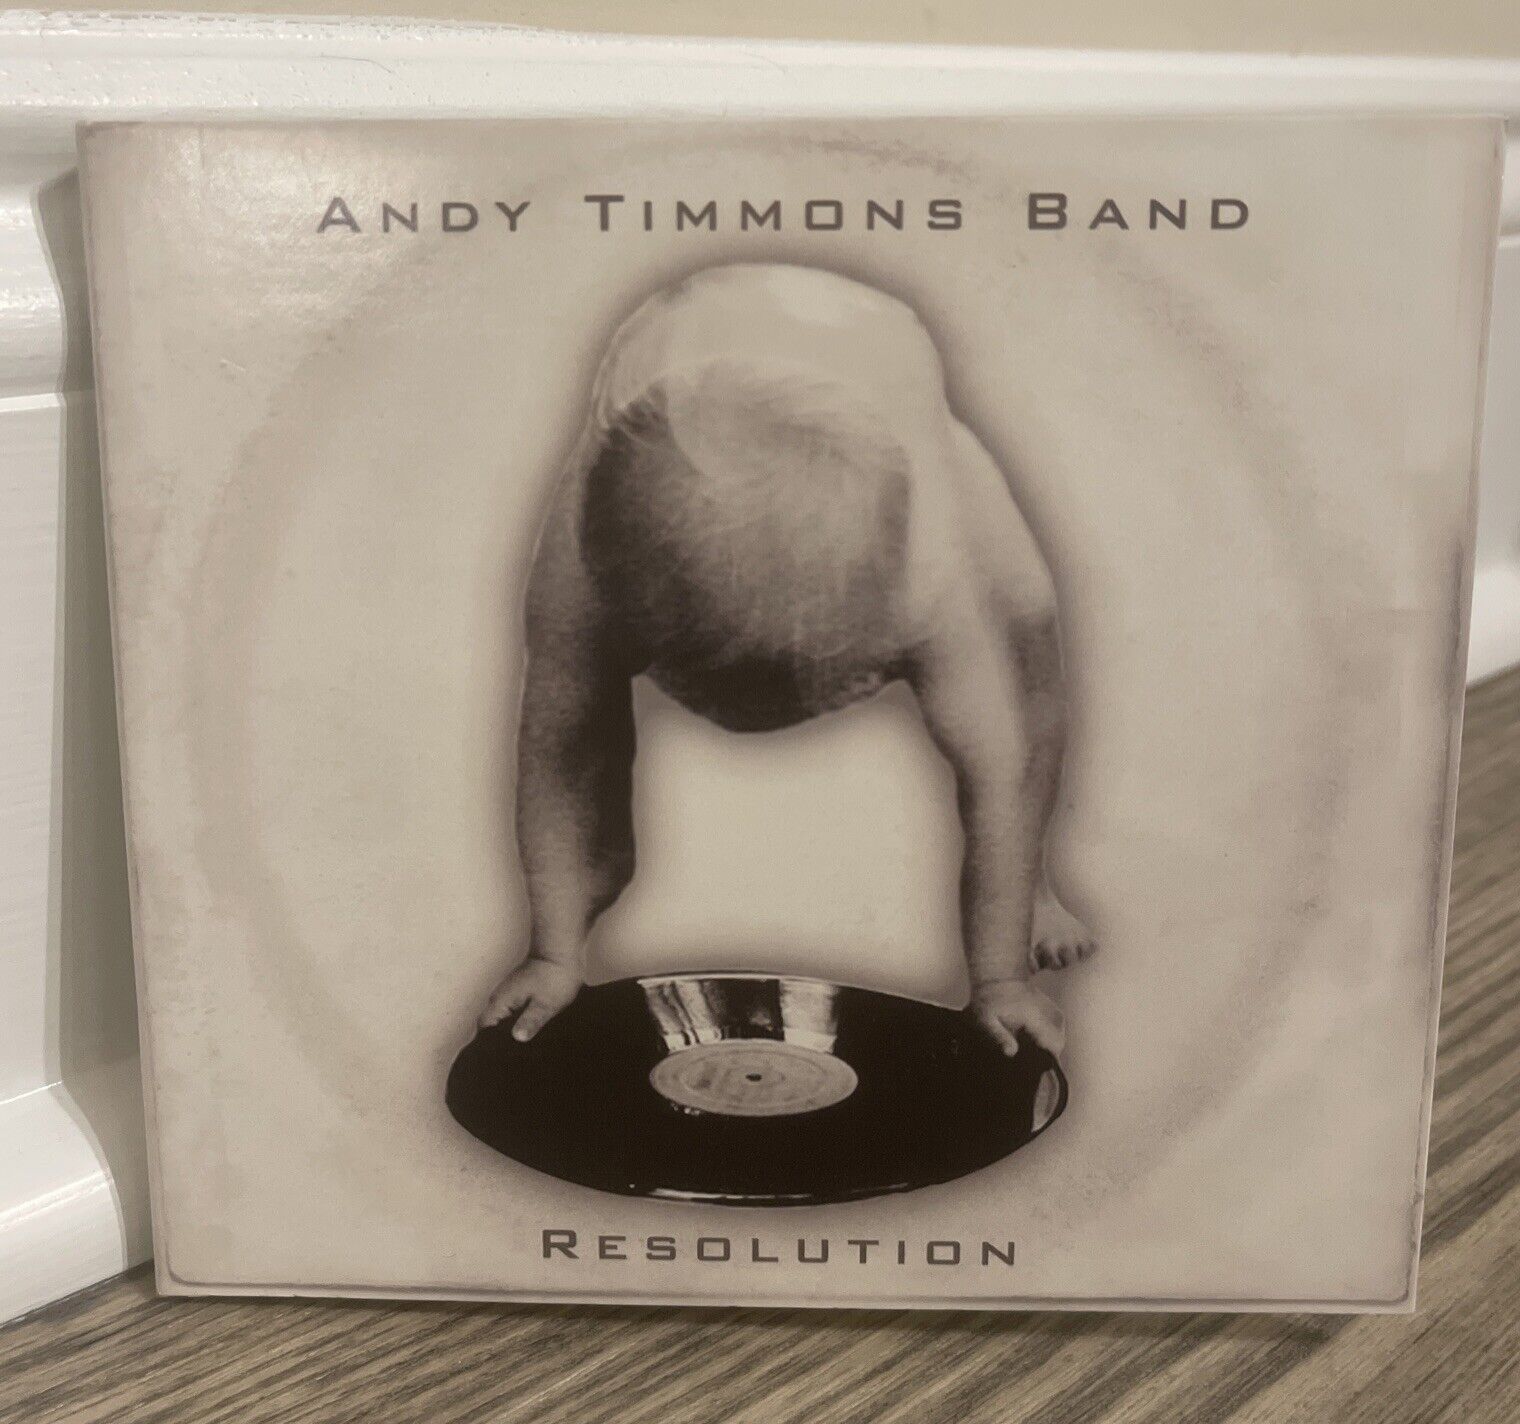 Resolution by Andy Timmons Band (CD, 2006, Favored Nations FN2560-2)